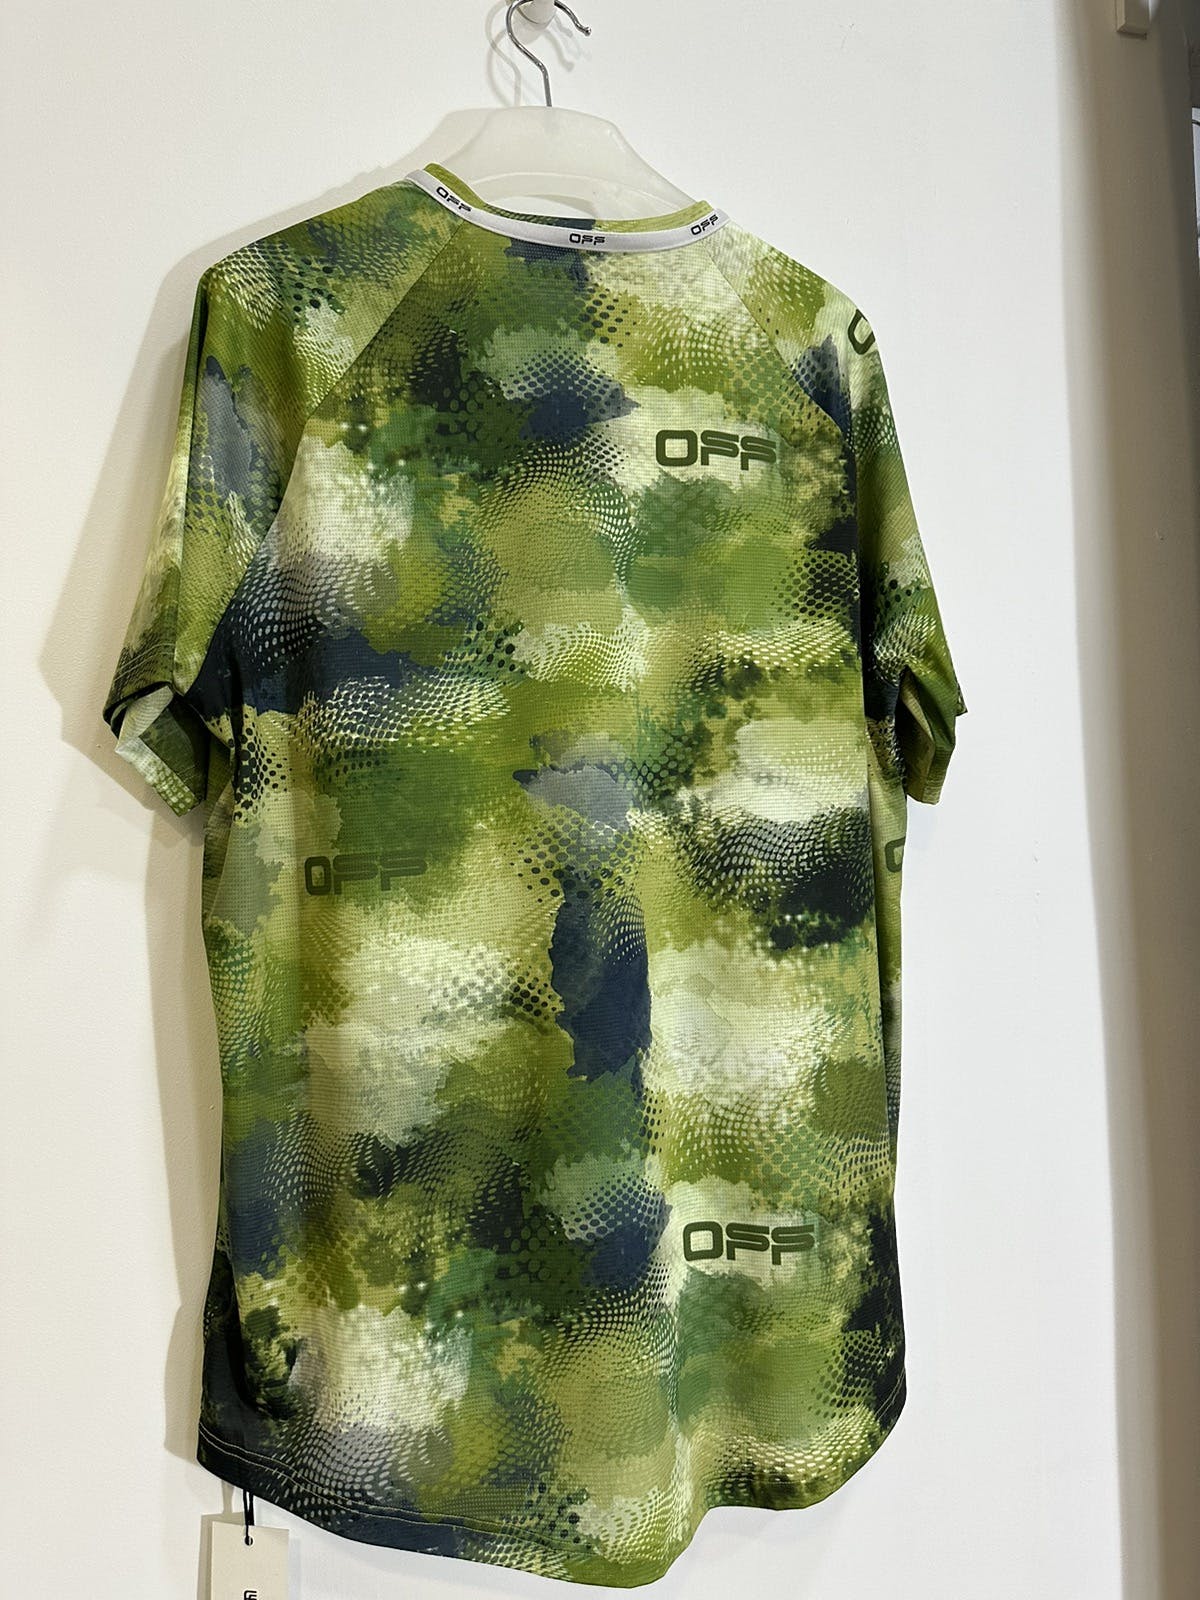 Off White Active Camo Print Jersey - 8